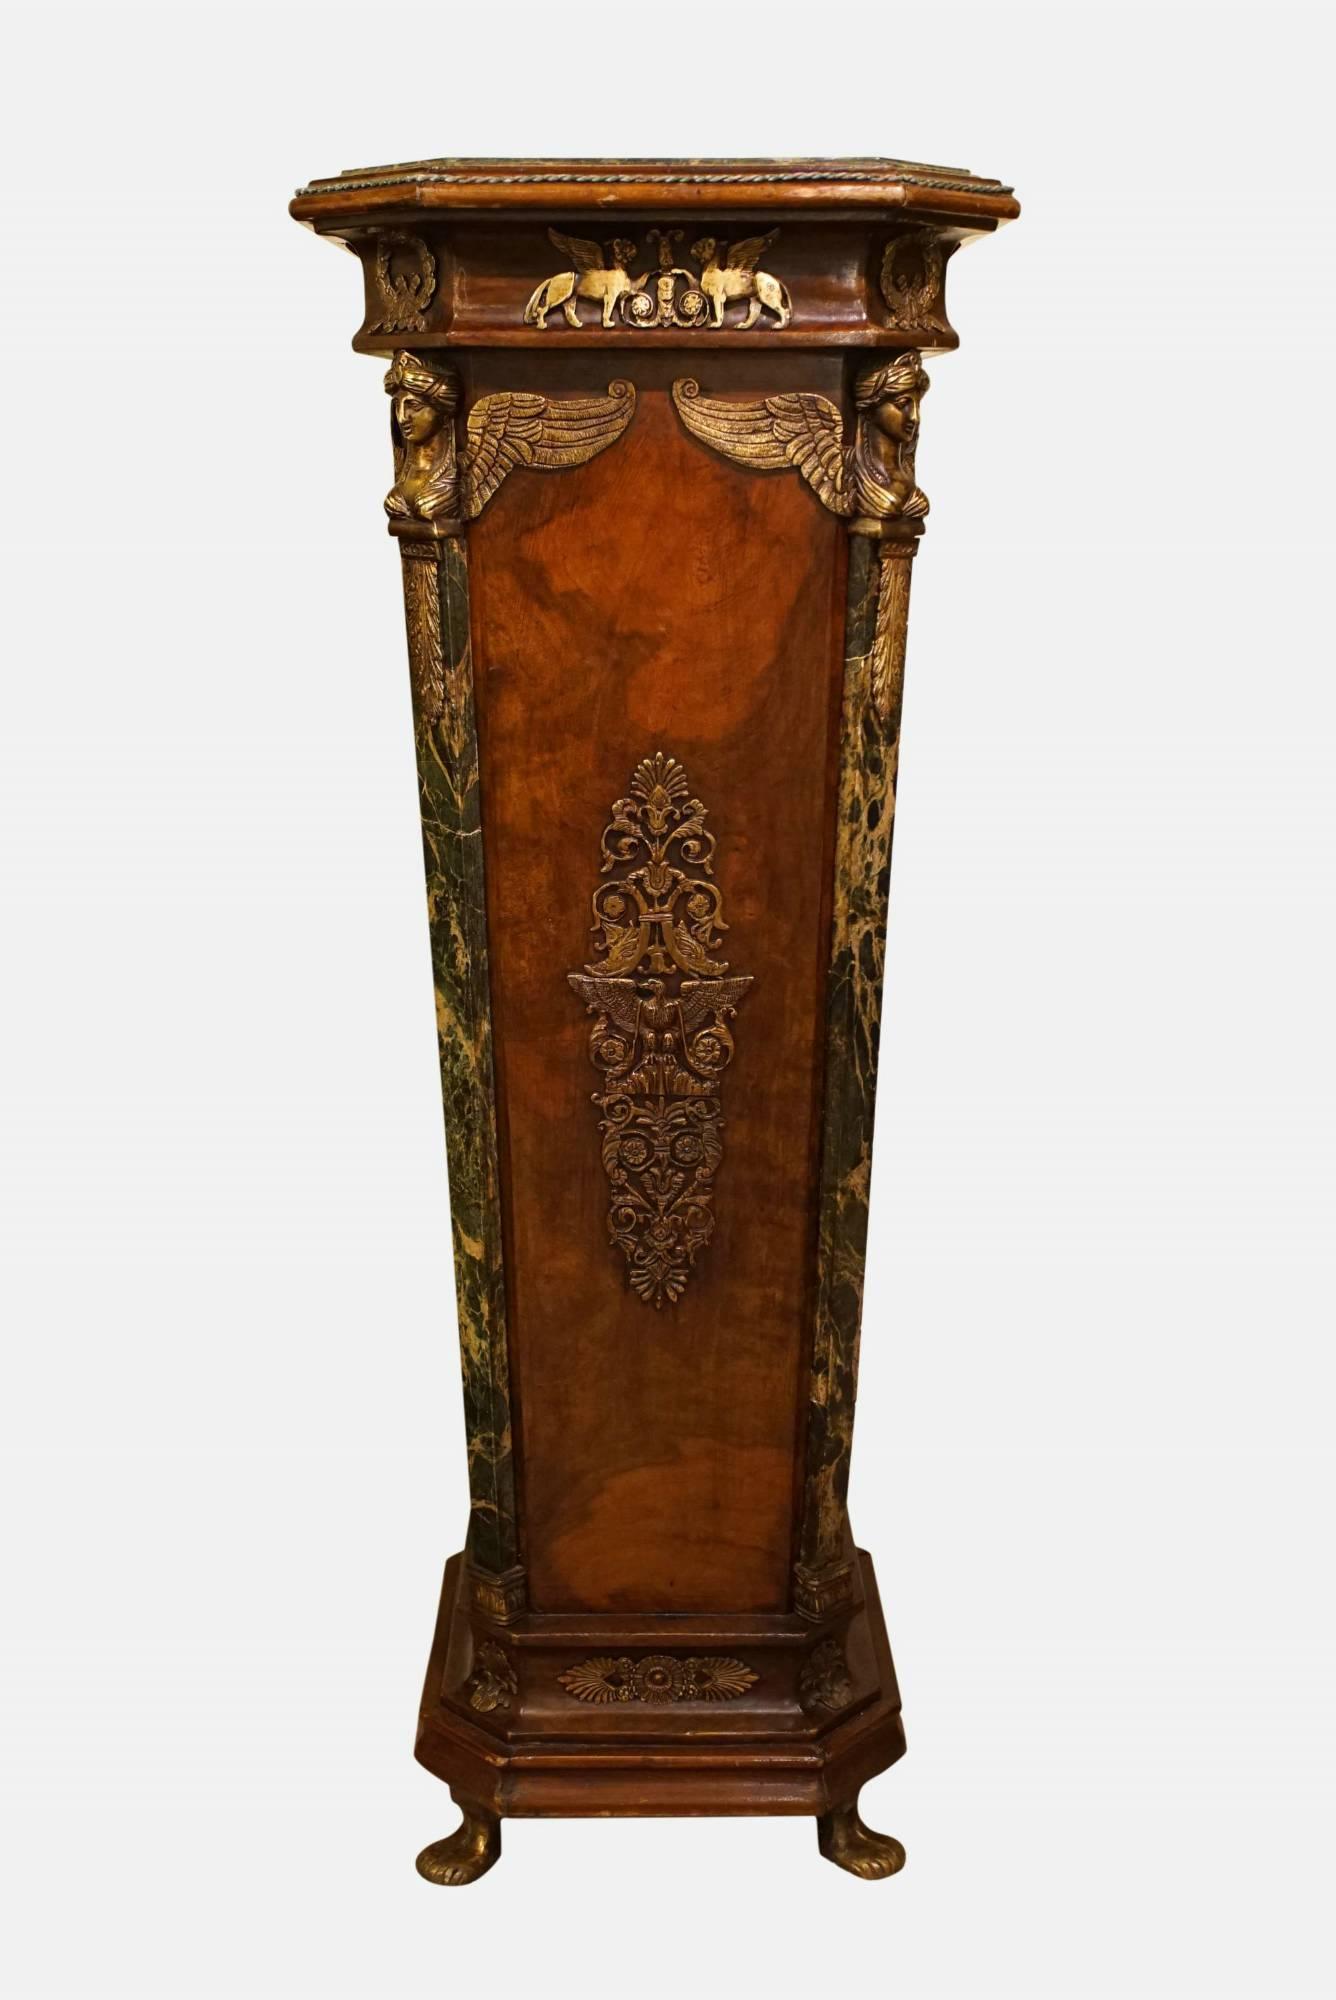 A pair of Empire style marble-topped pedestals with highly decorative ormolu detailing.